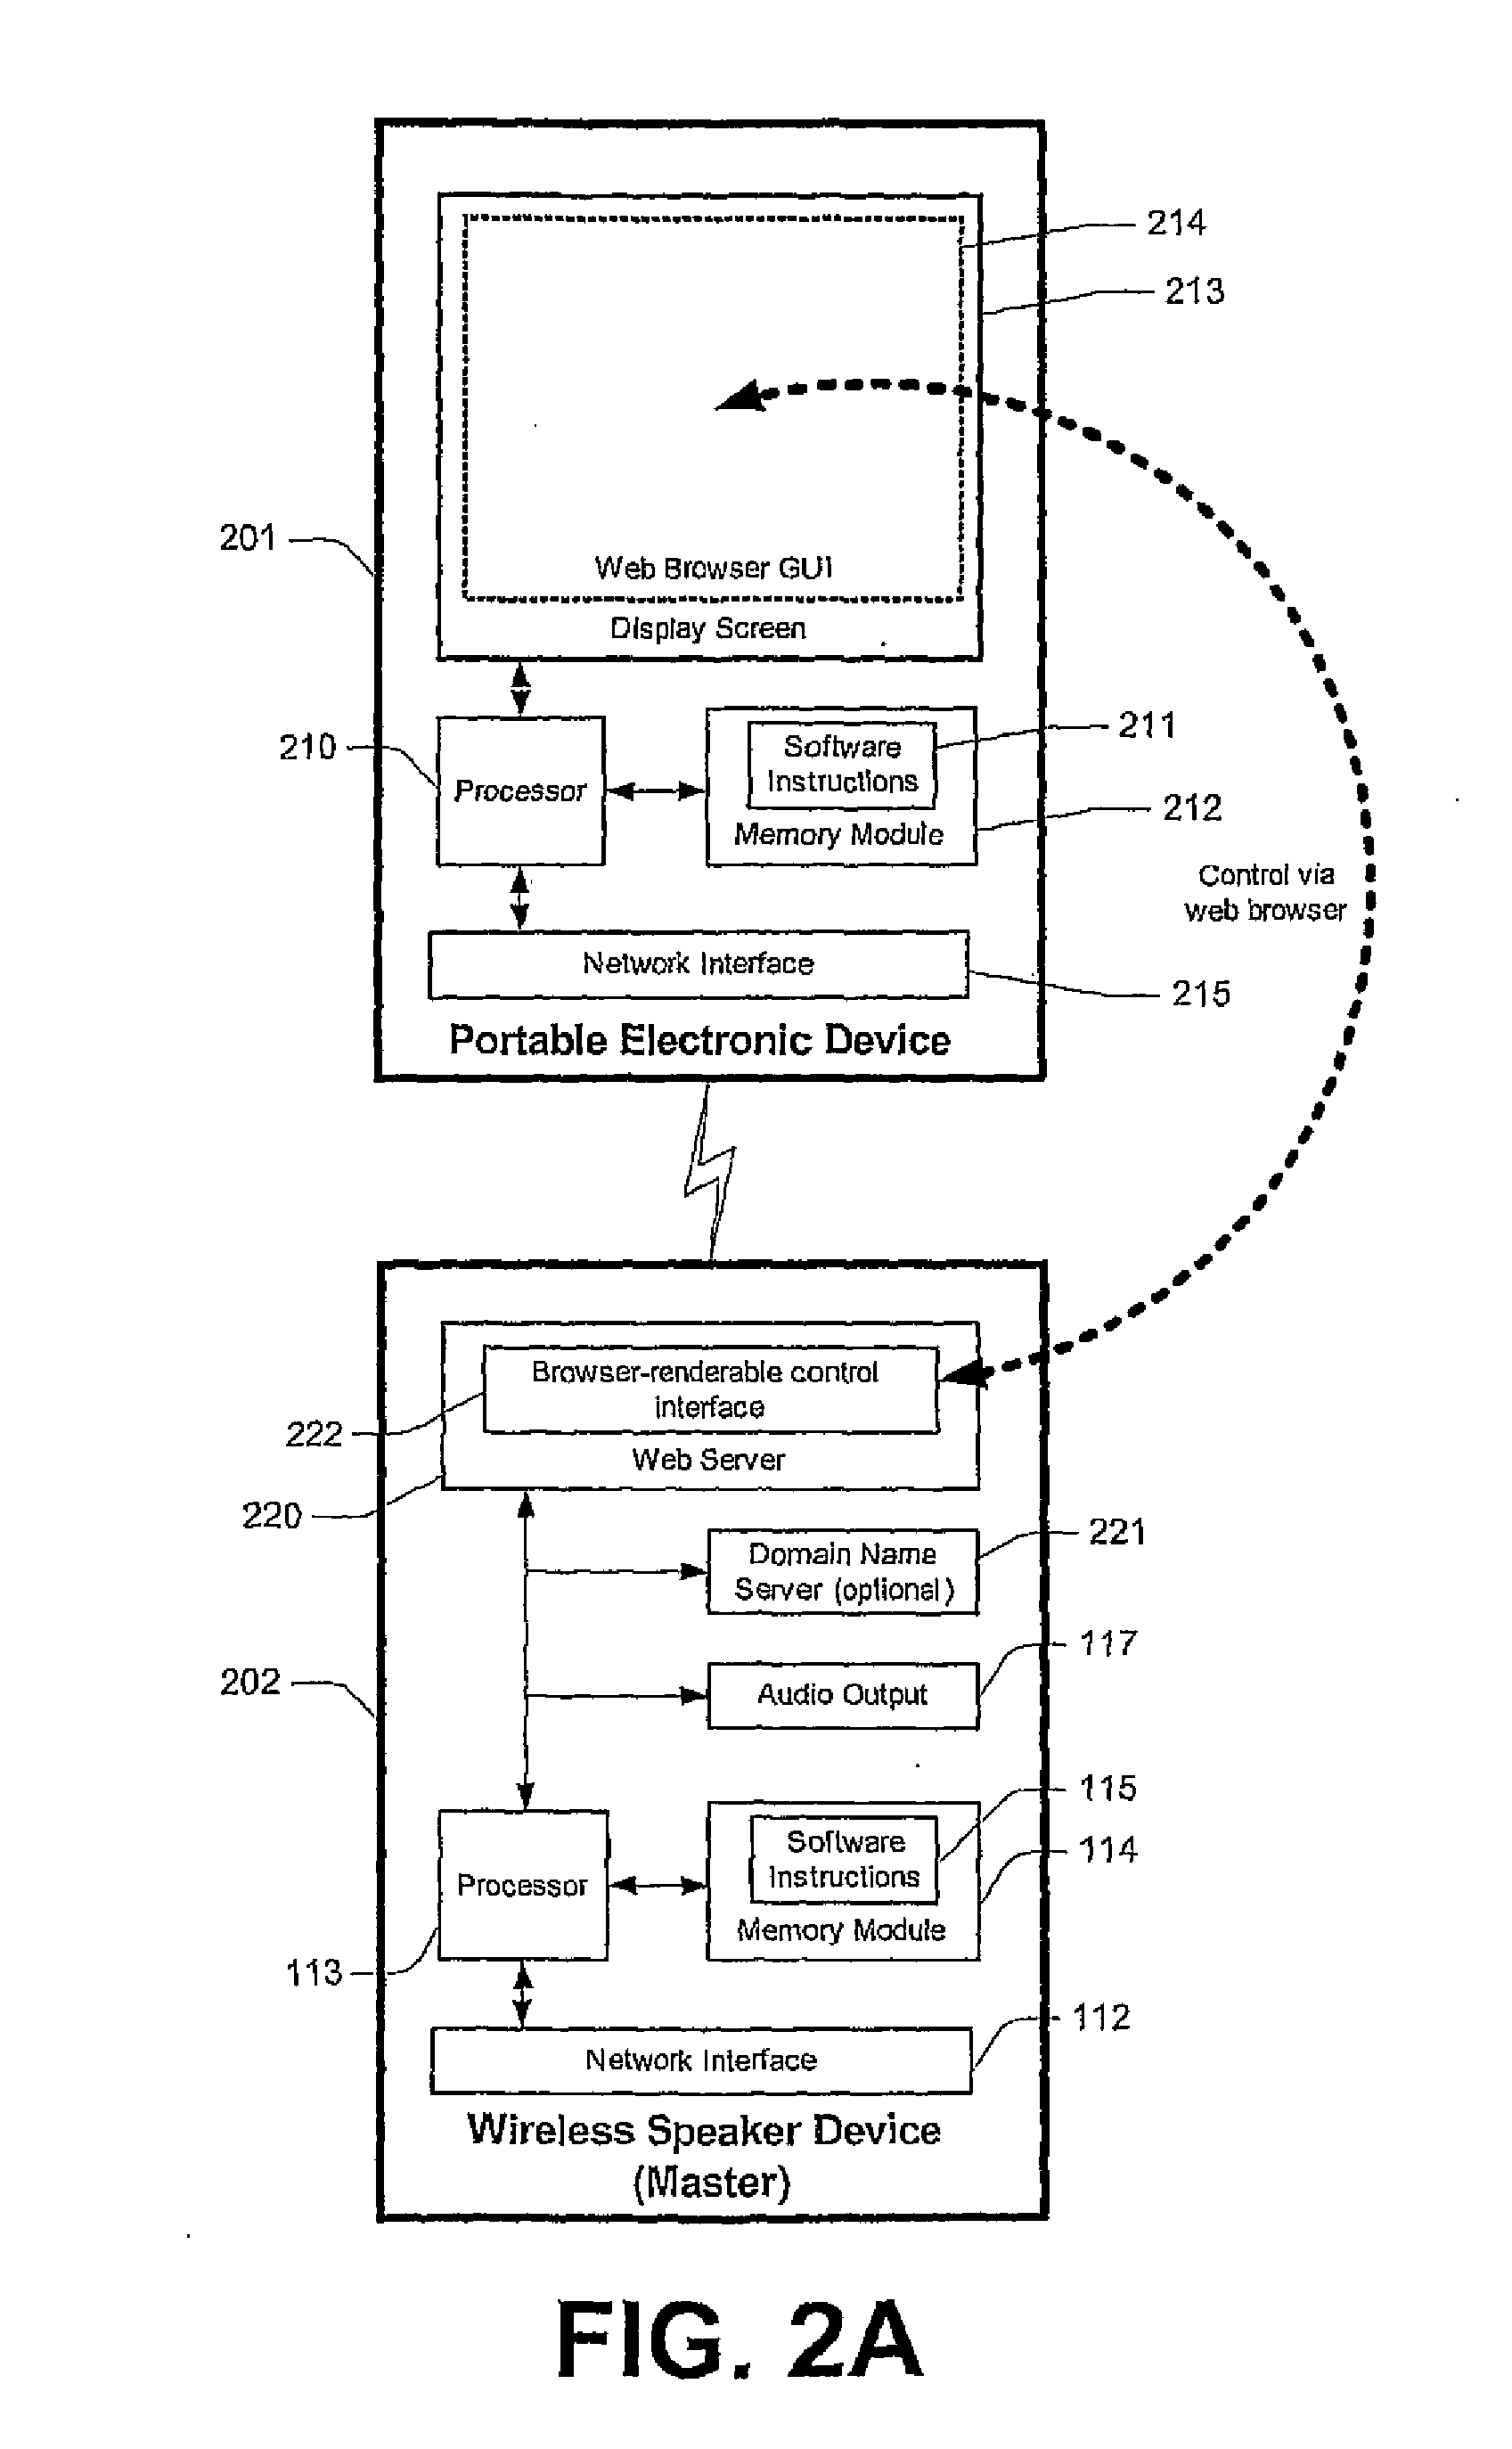 Systems and methods for providing a media playback in a networked environment